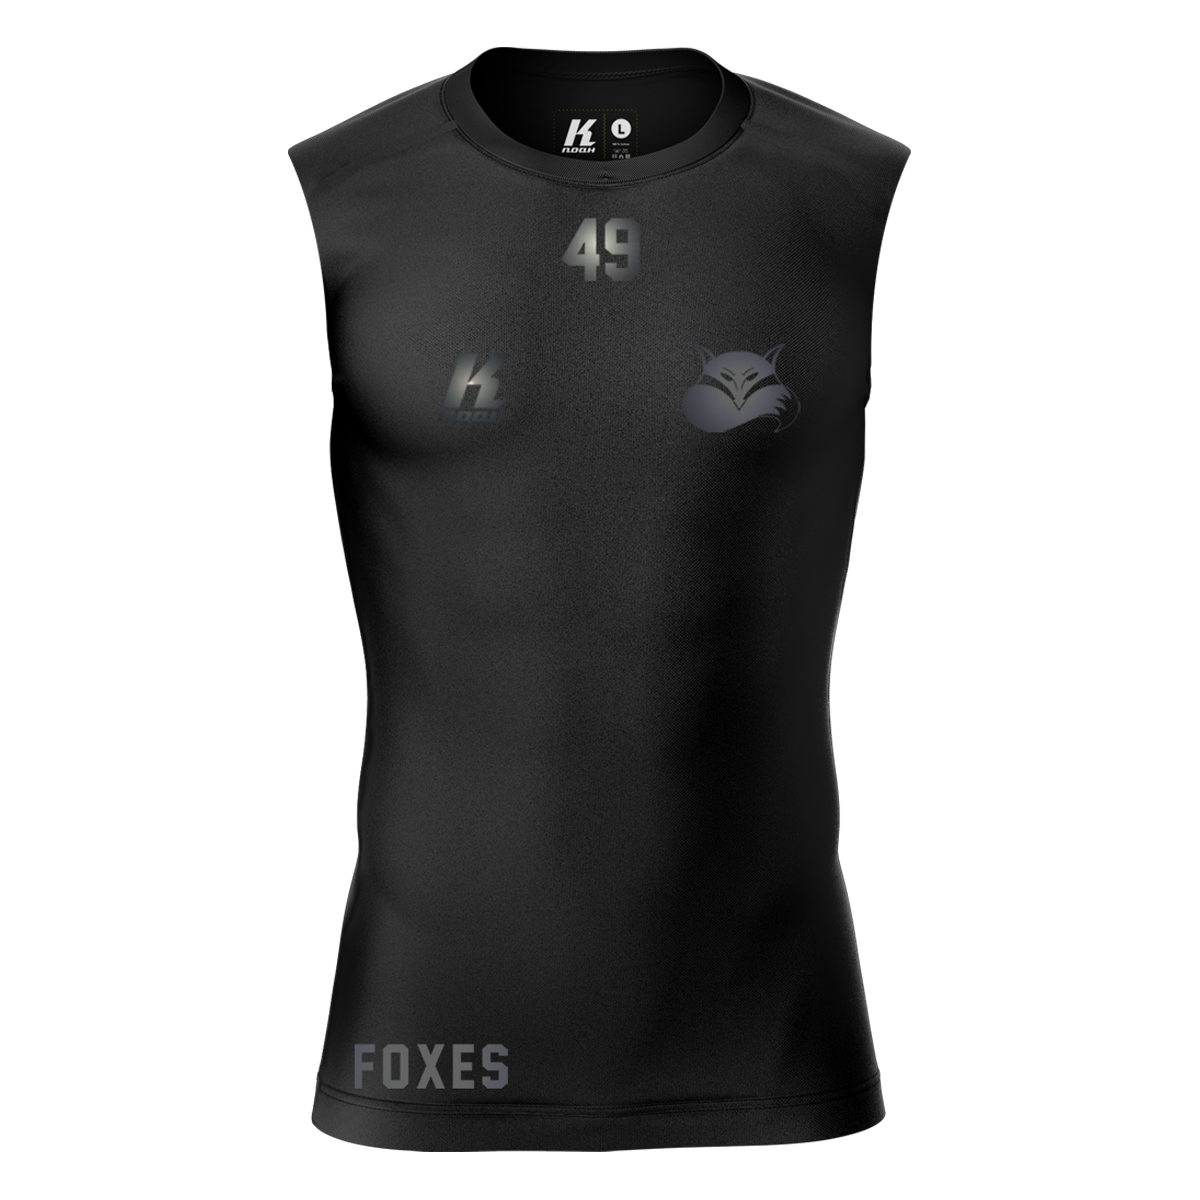 Foxes "Blackline" K.Tech Compression Sleeveless Shirt with Playernumber/Initials